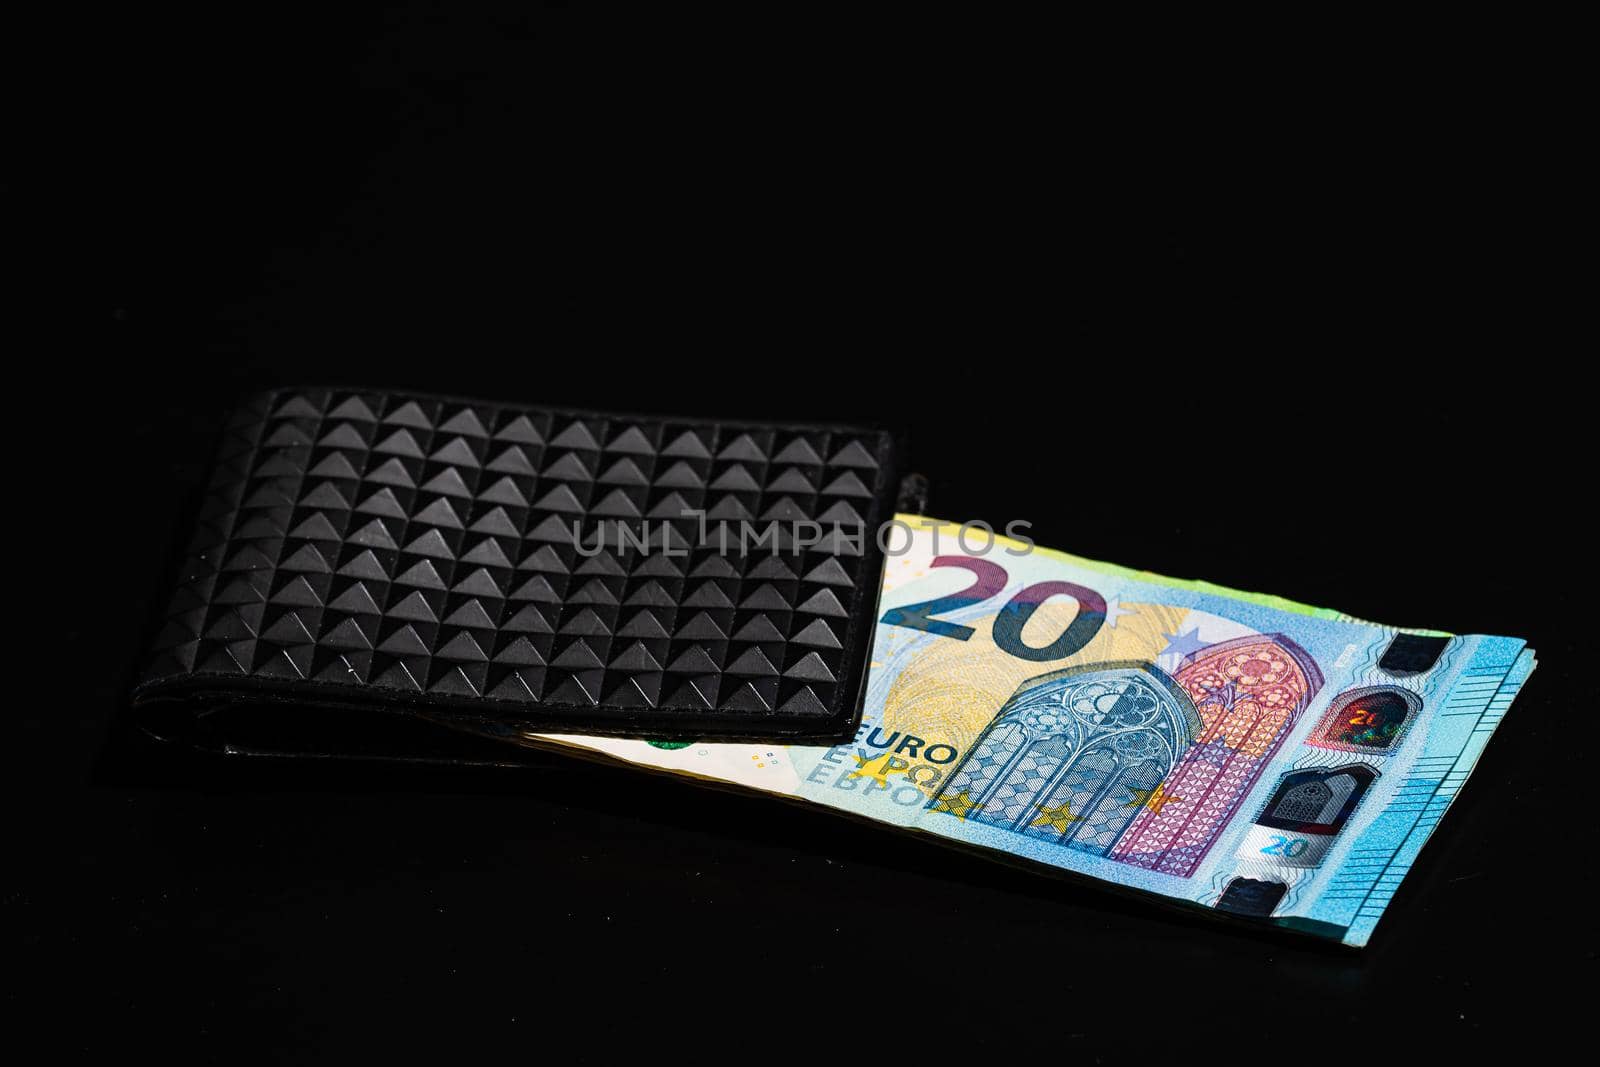 20 Euro money banknotes in black wallet isolated